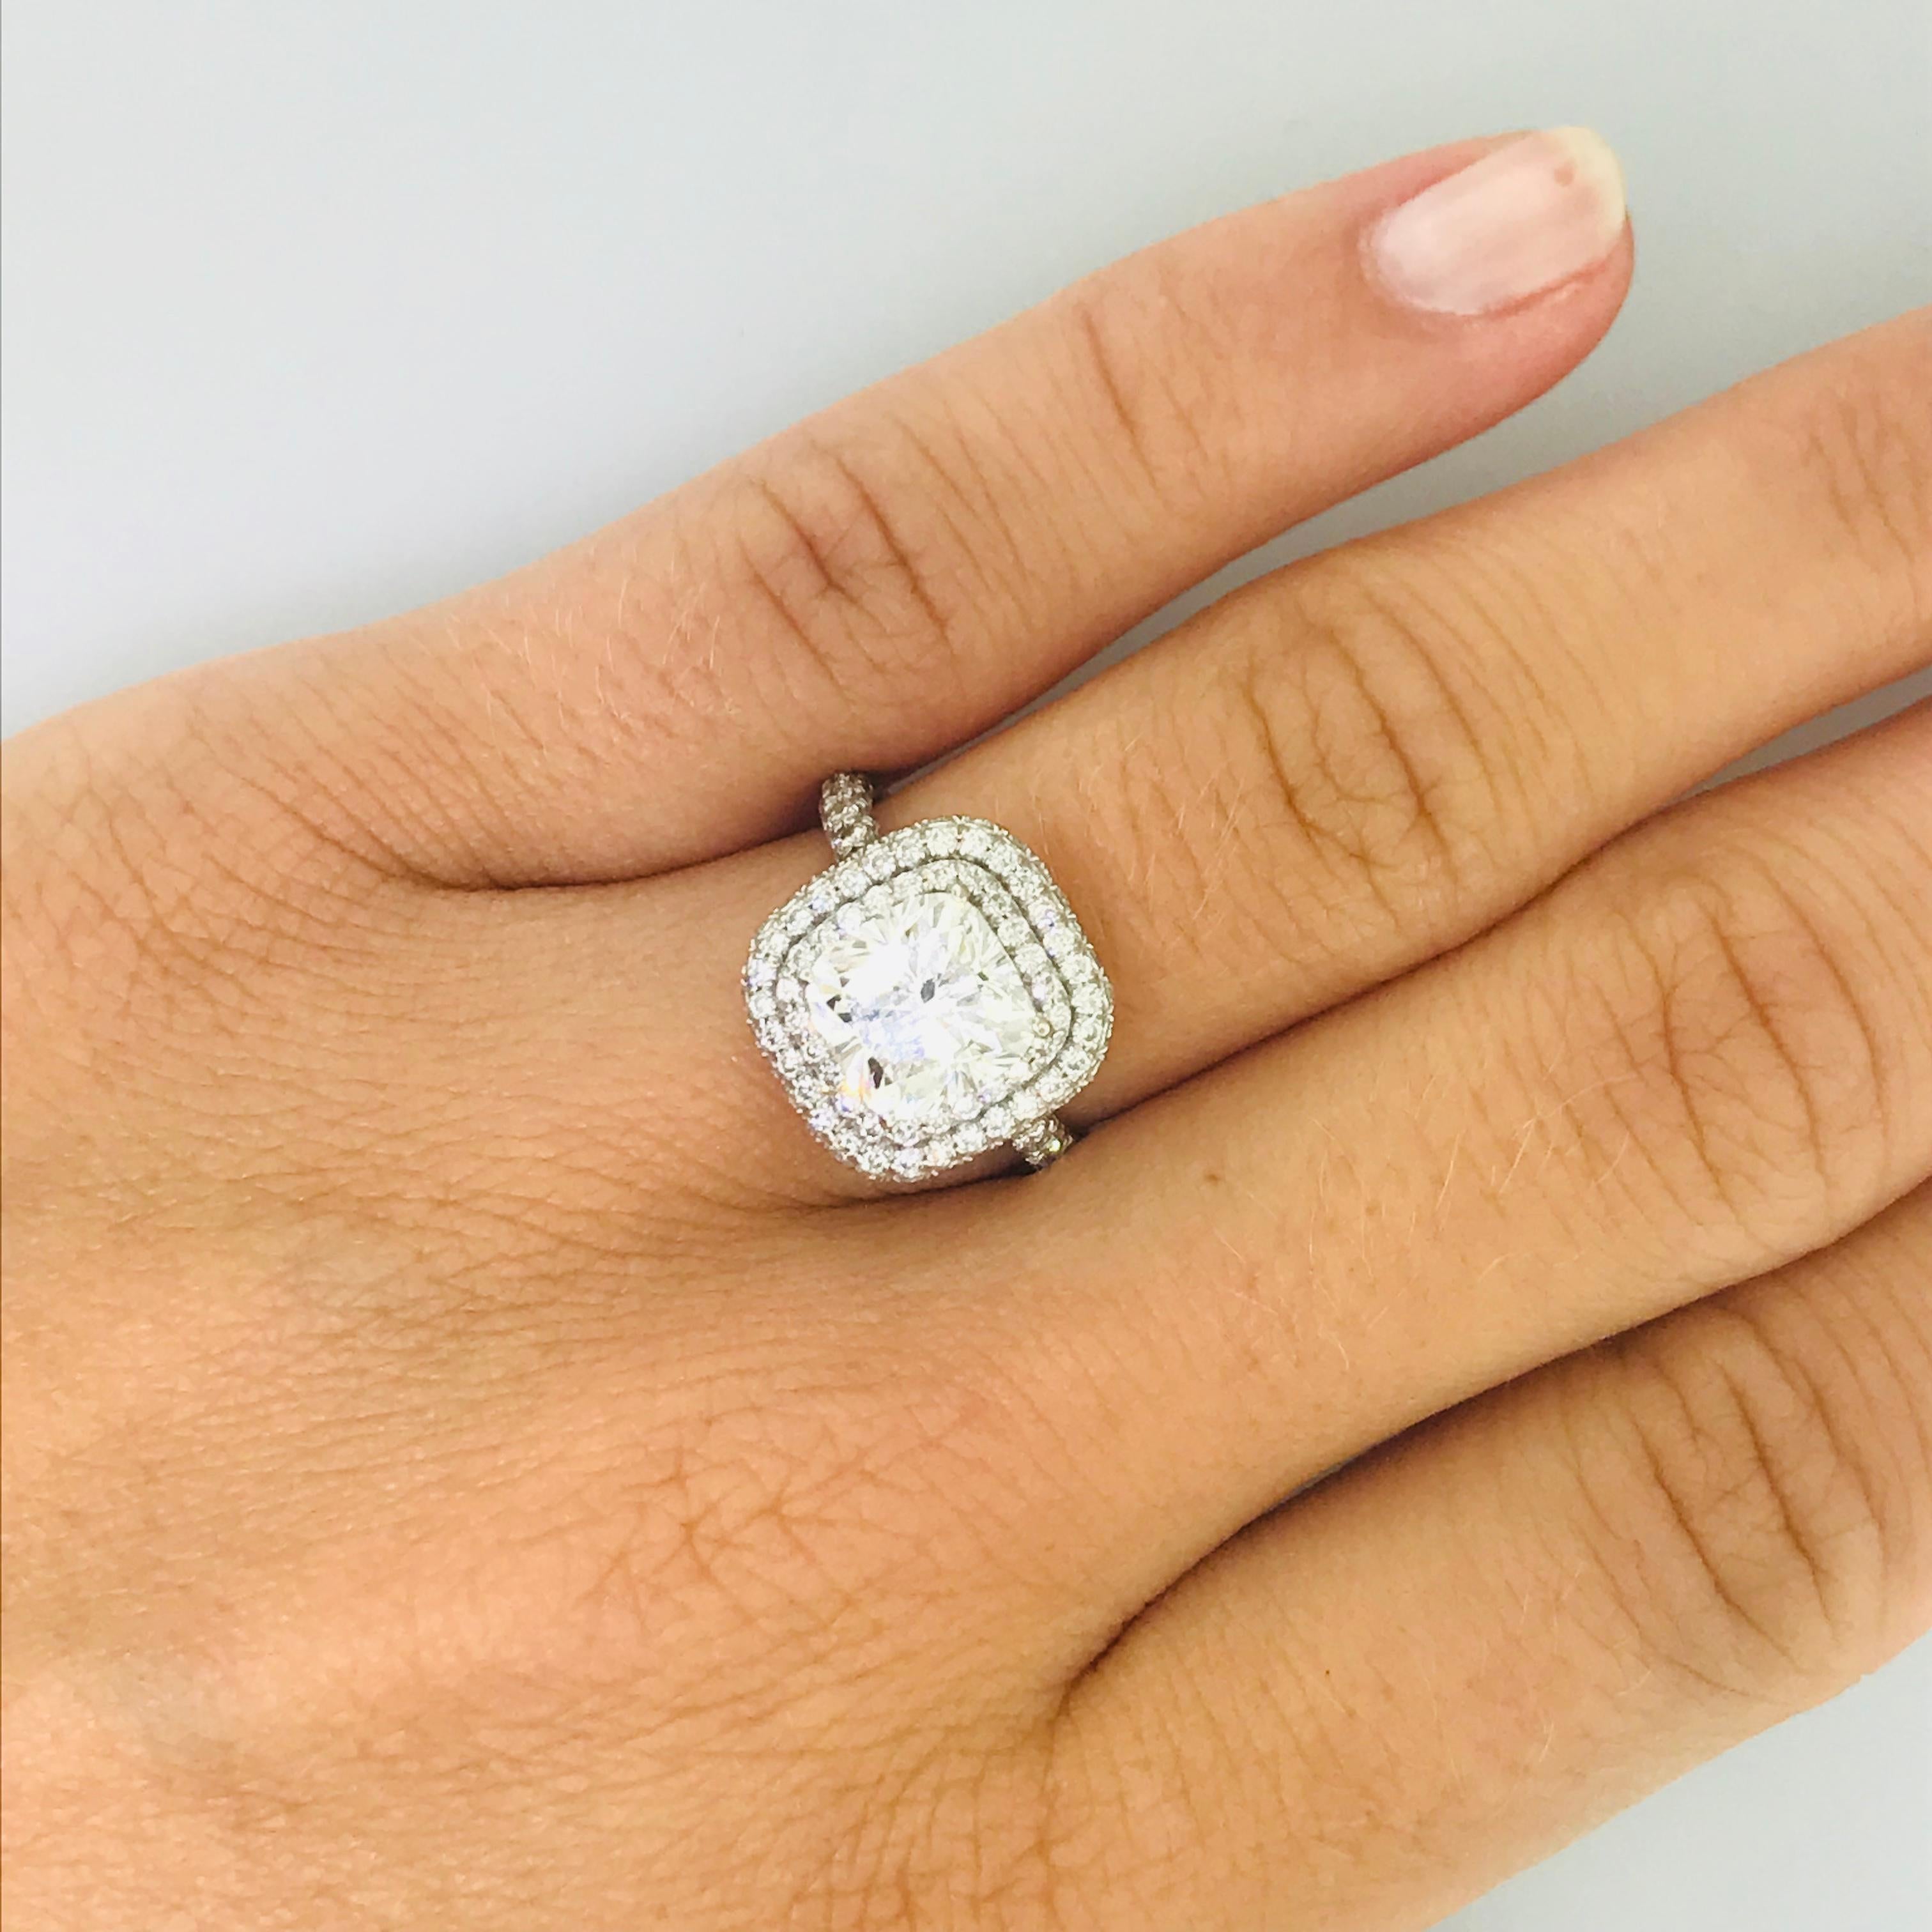 Bold & Beautiful Cushion Diamond Engagement Ring and Gorgeous on any hand! The cushion diamond double halo engagement ring holds a 2.51-carat cushion diamond that is accompanied by a laboratory certificate. The center diamond is a bright white H